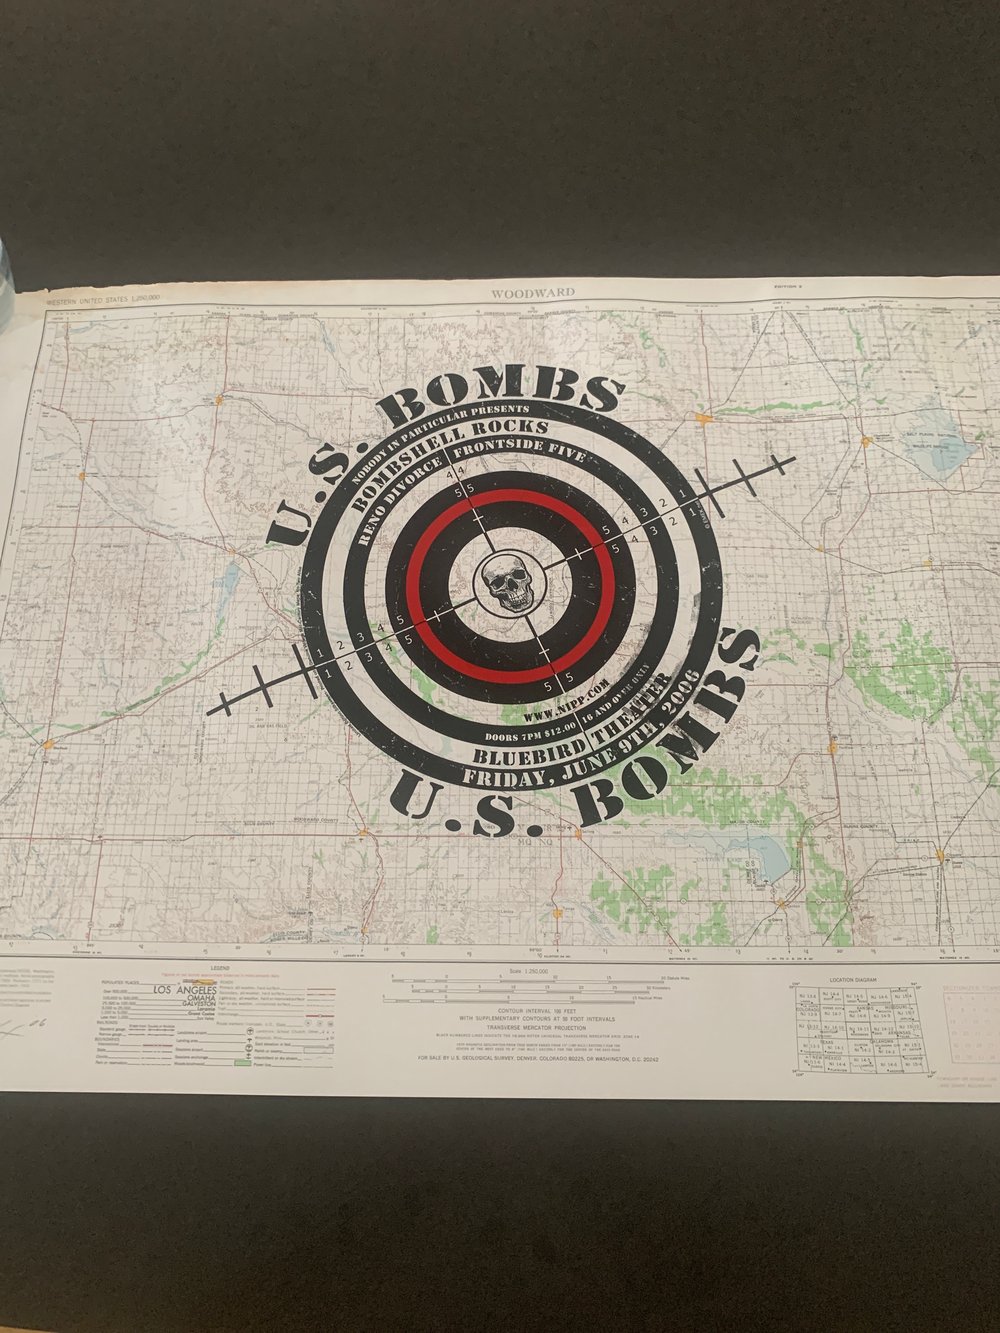 EMEK One Of A Kind US Bombs Silkscreen Concert Poster On Vintage Map Paper #13, Signed 2006